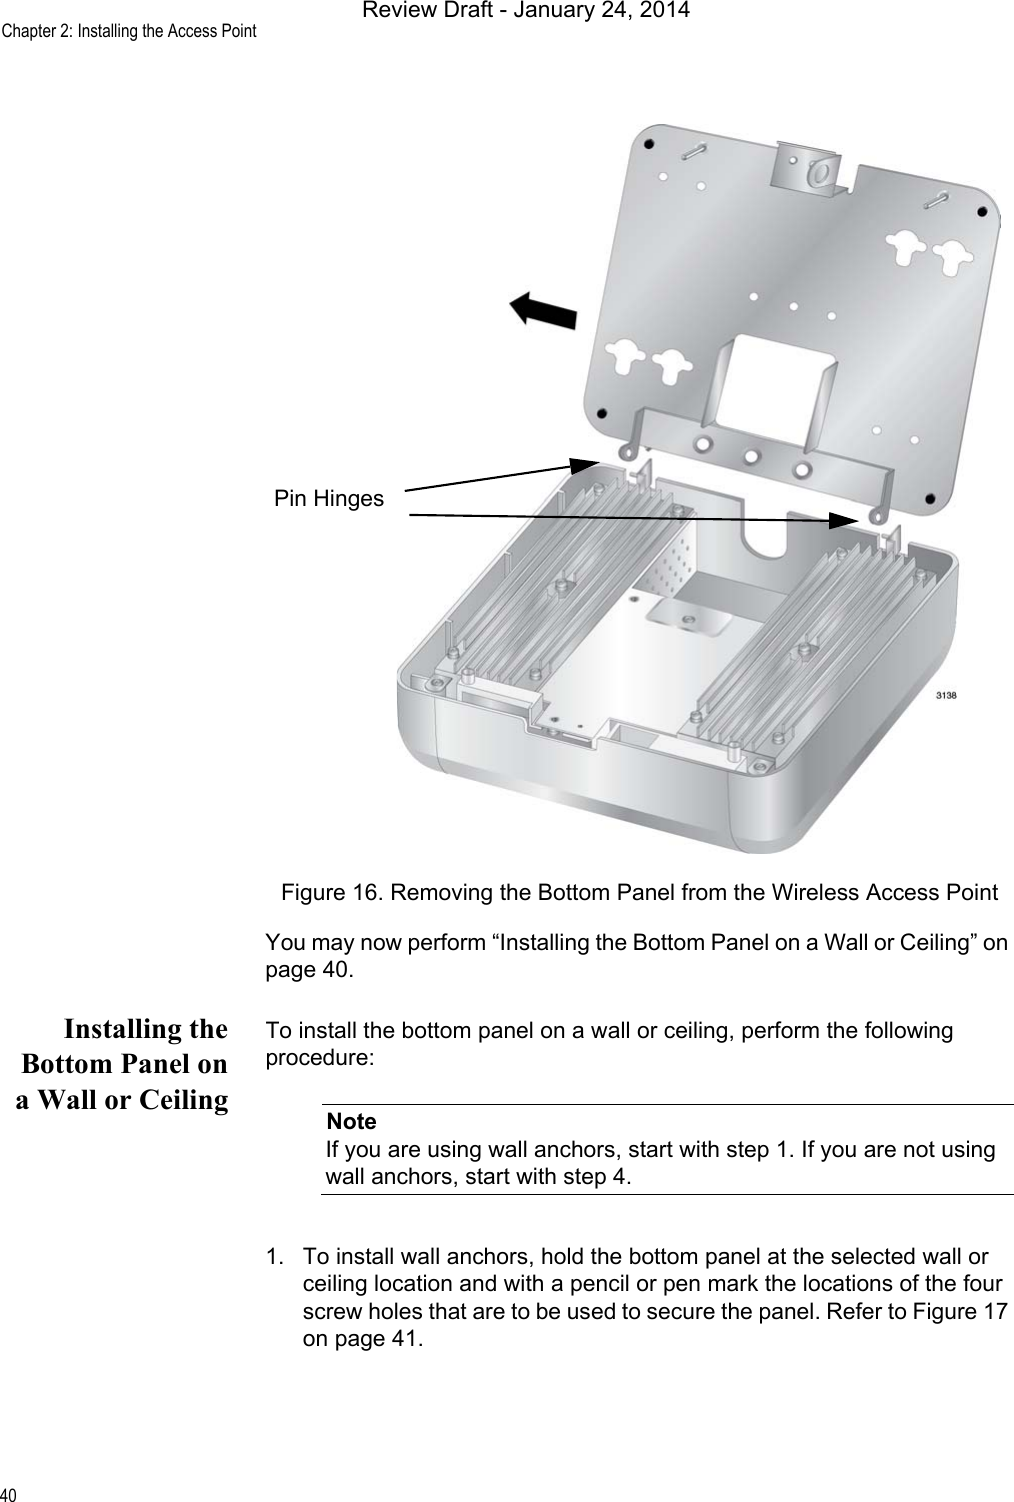 Chapter 2: Installing the Access Point40Figure 16. Removing the Bottom Panel from the Wireless Access PointYou may now perform “Installing the Bottom Panel on a Wall or Ceiling” on page 40.Installing theBottom Panel ona Wall or CeilingTo install the bottom panel on a wall or ceiling, perform the following procedure:NoteIf you are using wall anchors, start with step 1. If you are not using wall anchors, start with step 4.1. To install wall anchors, hold the bottom panel at the selected wall or ceiling location and with a pencil or pen mark the locations of the four screw holes that are to be used to secure the panel. Refer to Figure 17 on page 41.Pin HingesReview Draft - January 24, 2014